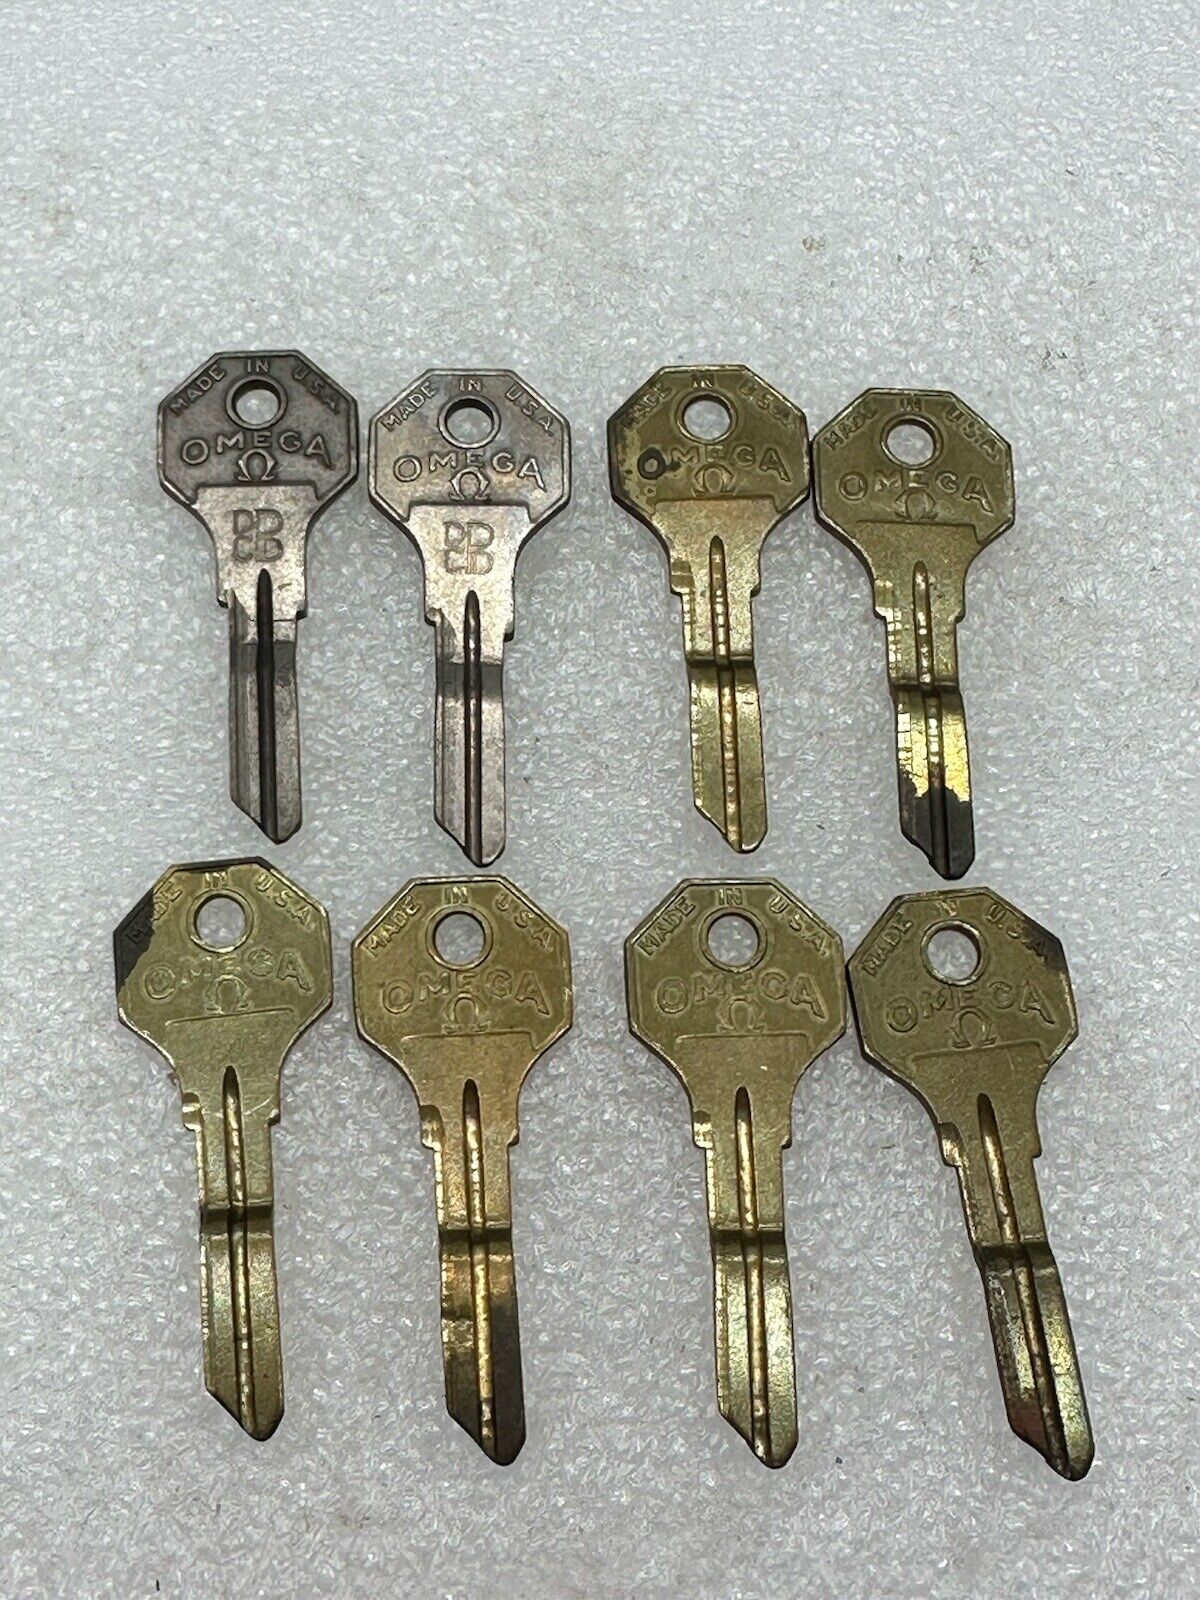 Lot Of 8 Yale & Towne Omega Key Blanks For 1933 Chrysler Plymouth Dodge